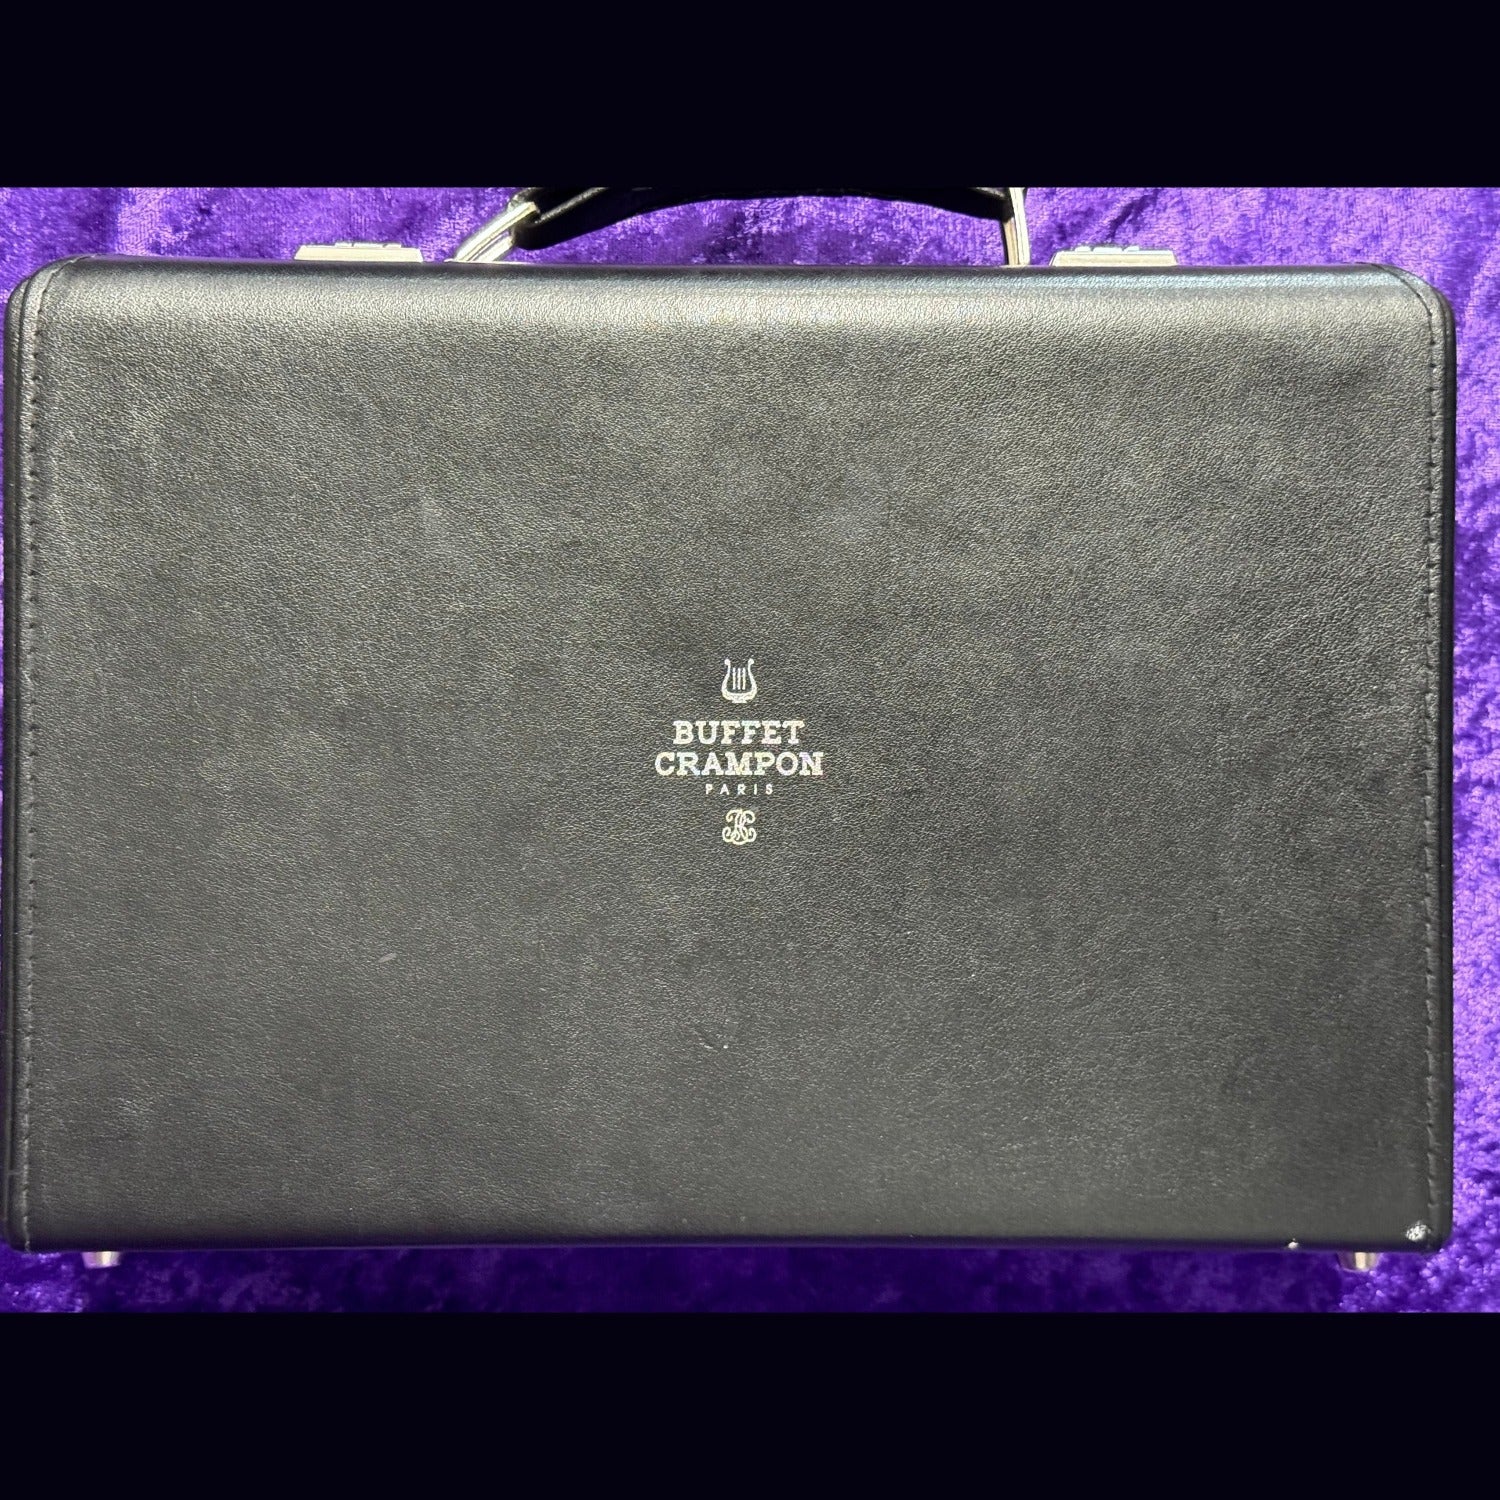 Buffet Crampon attache case, closed, featuring logo on top, on a purple background